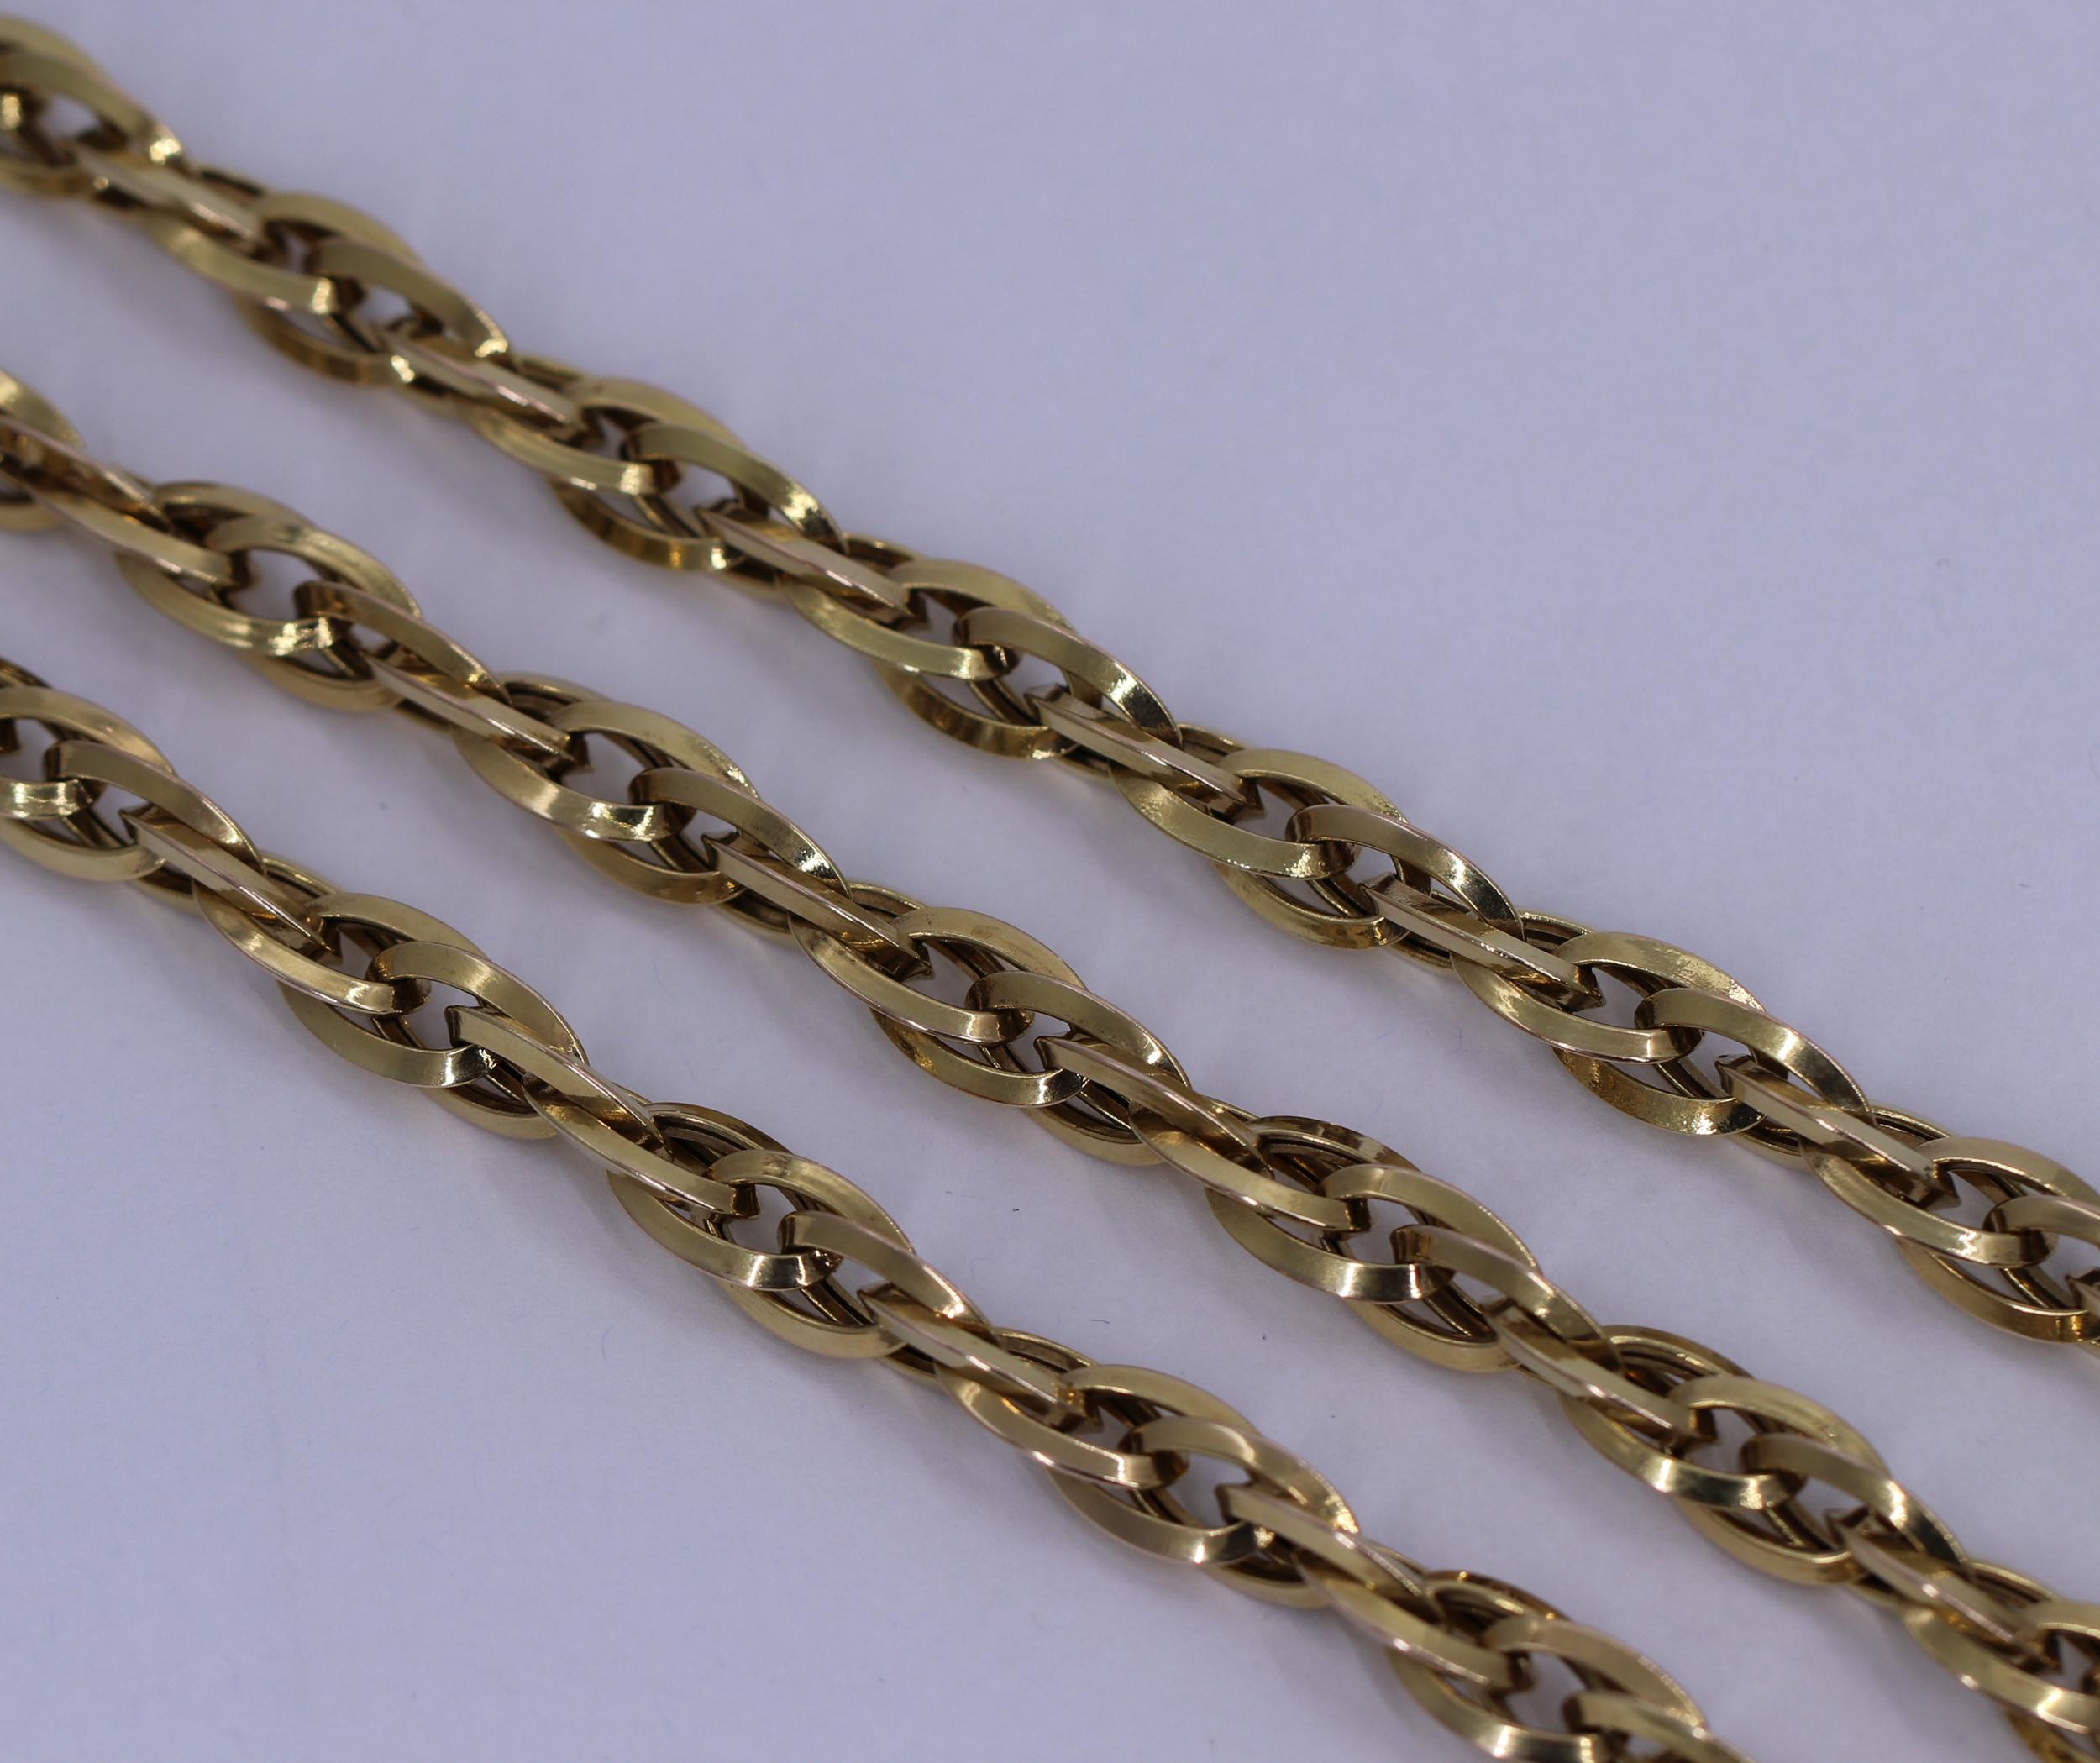 A ladies 14 karat yellow gold necklace measuring 36 inches long, and 3/8 of an inch wide. Made of interlocking links, it has a high polished finish, and a spiraling design. The chain features a good size lobster-claw clasp, making it easy to wear.